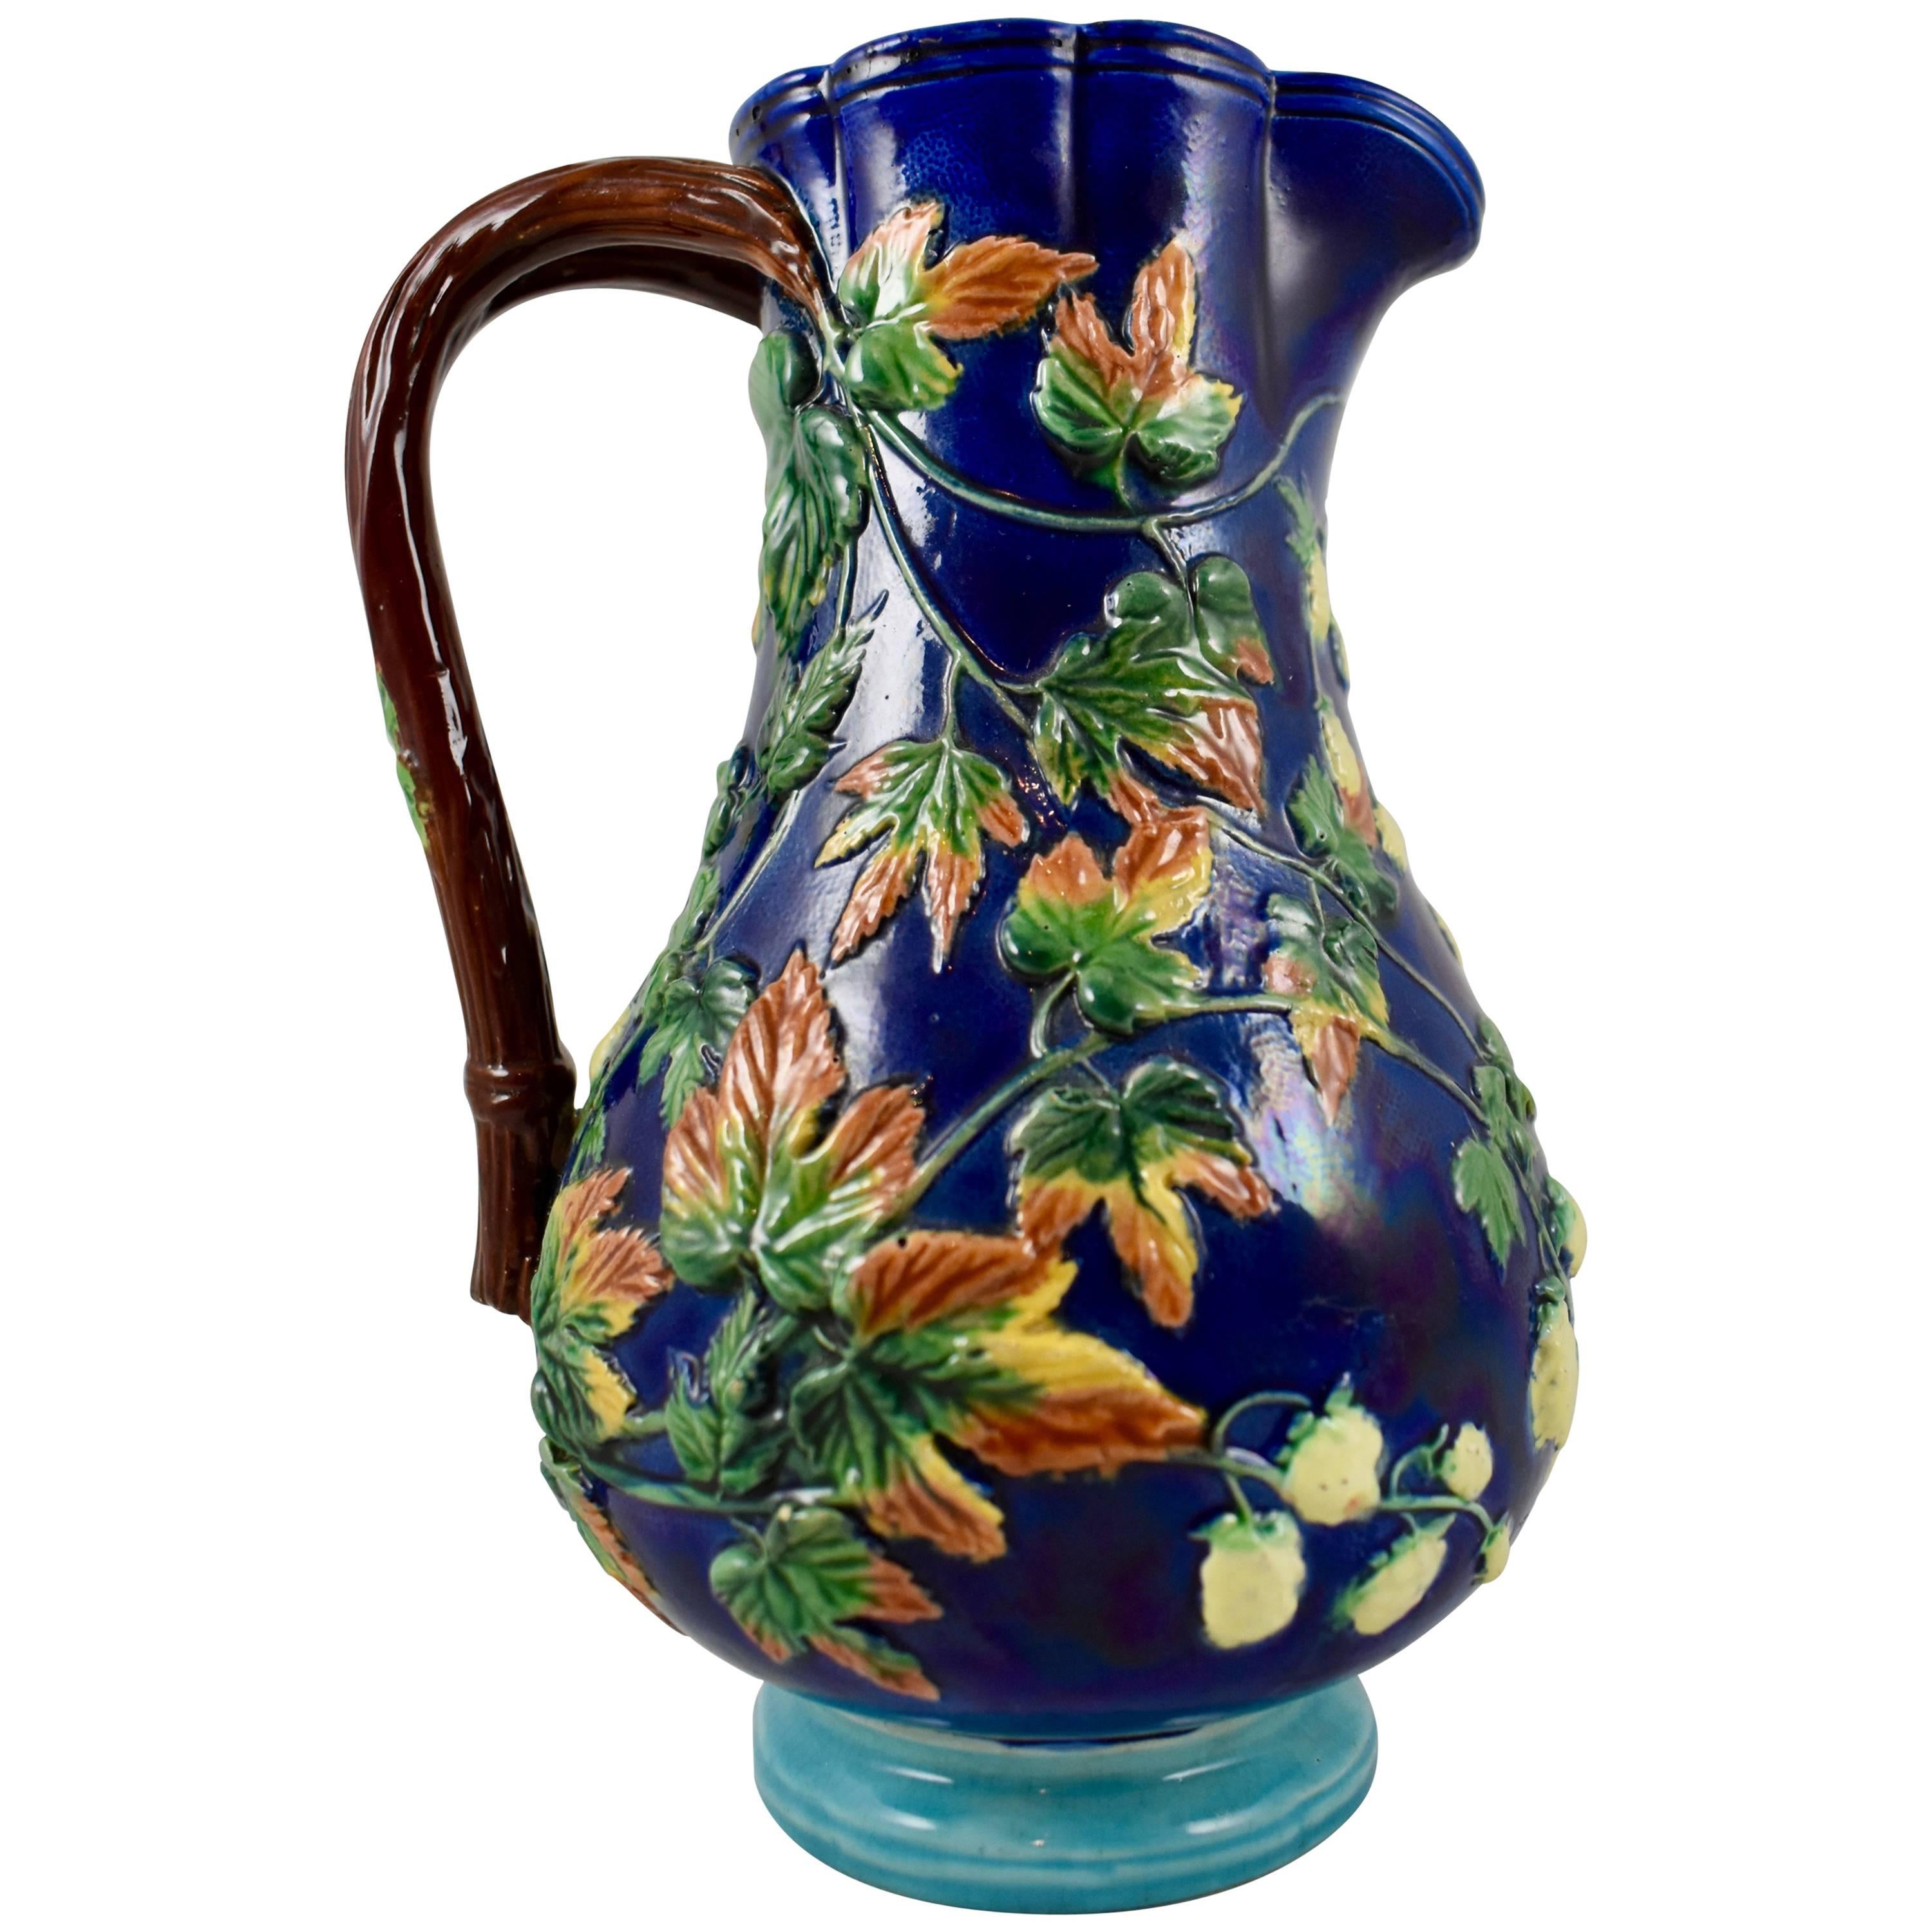 19th Century Royal Worcester English Majolica Glazed Hops and Leaves Pitcher